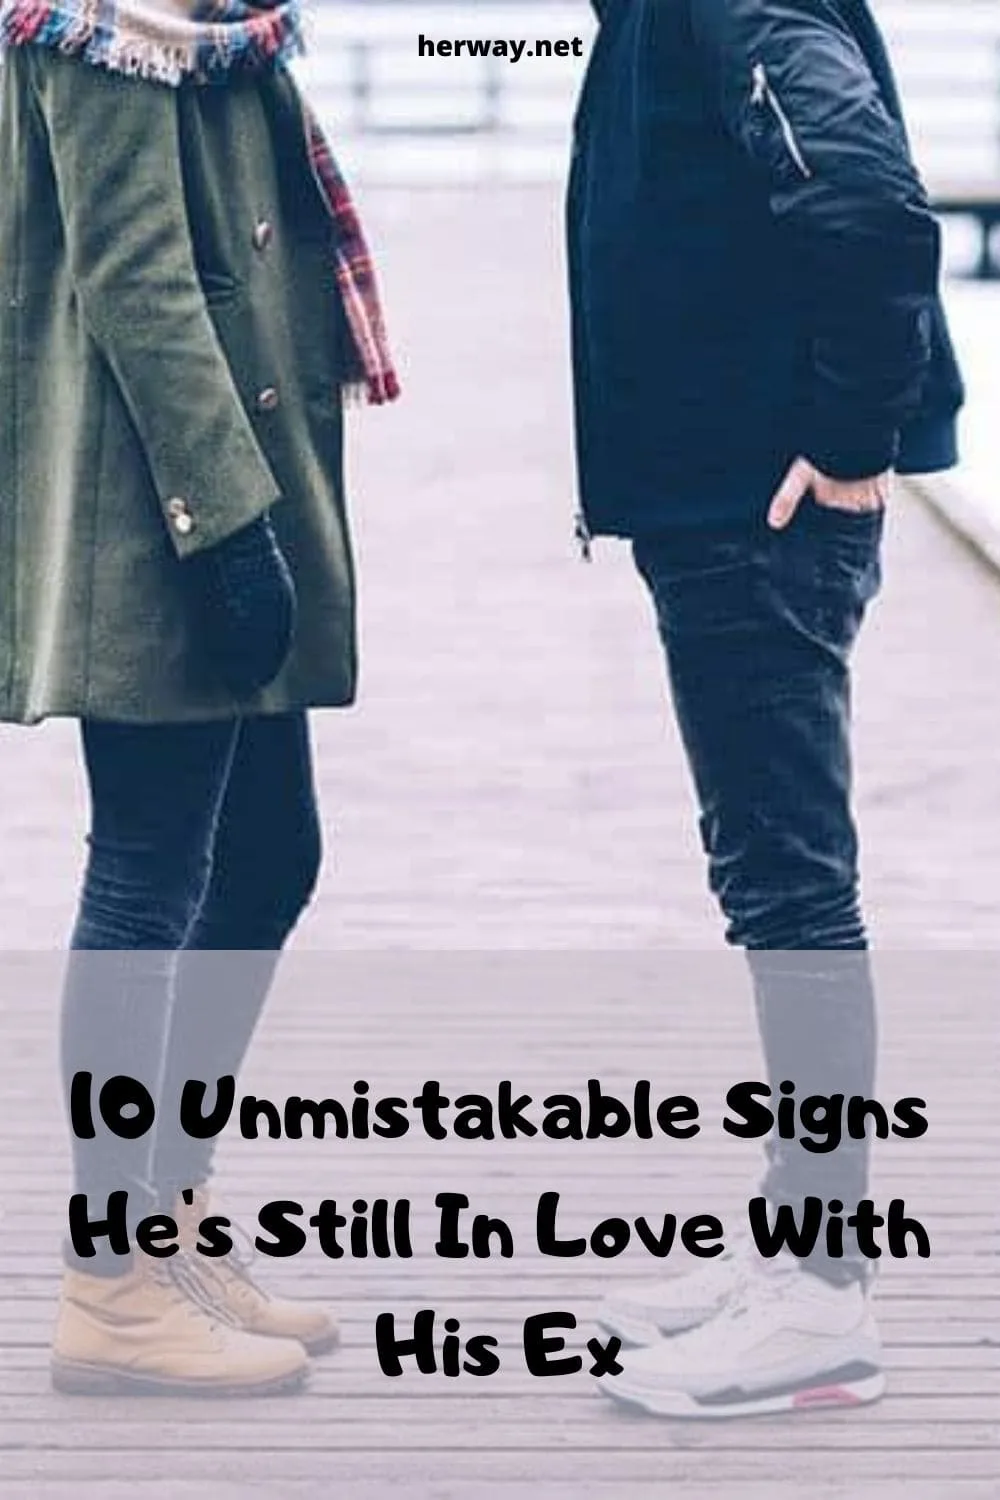 10 Unmistakable Signs He's Still In Love With His Ex